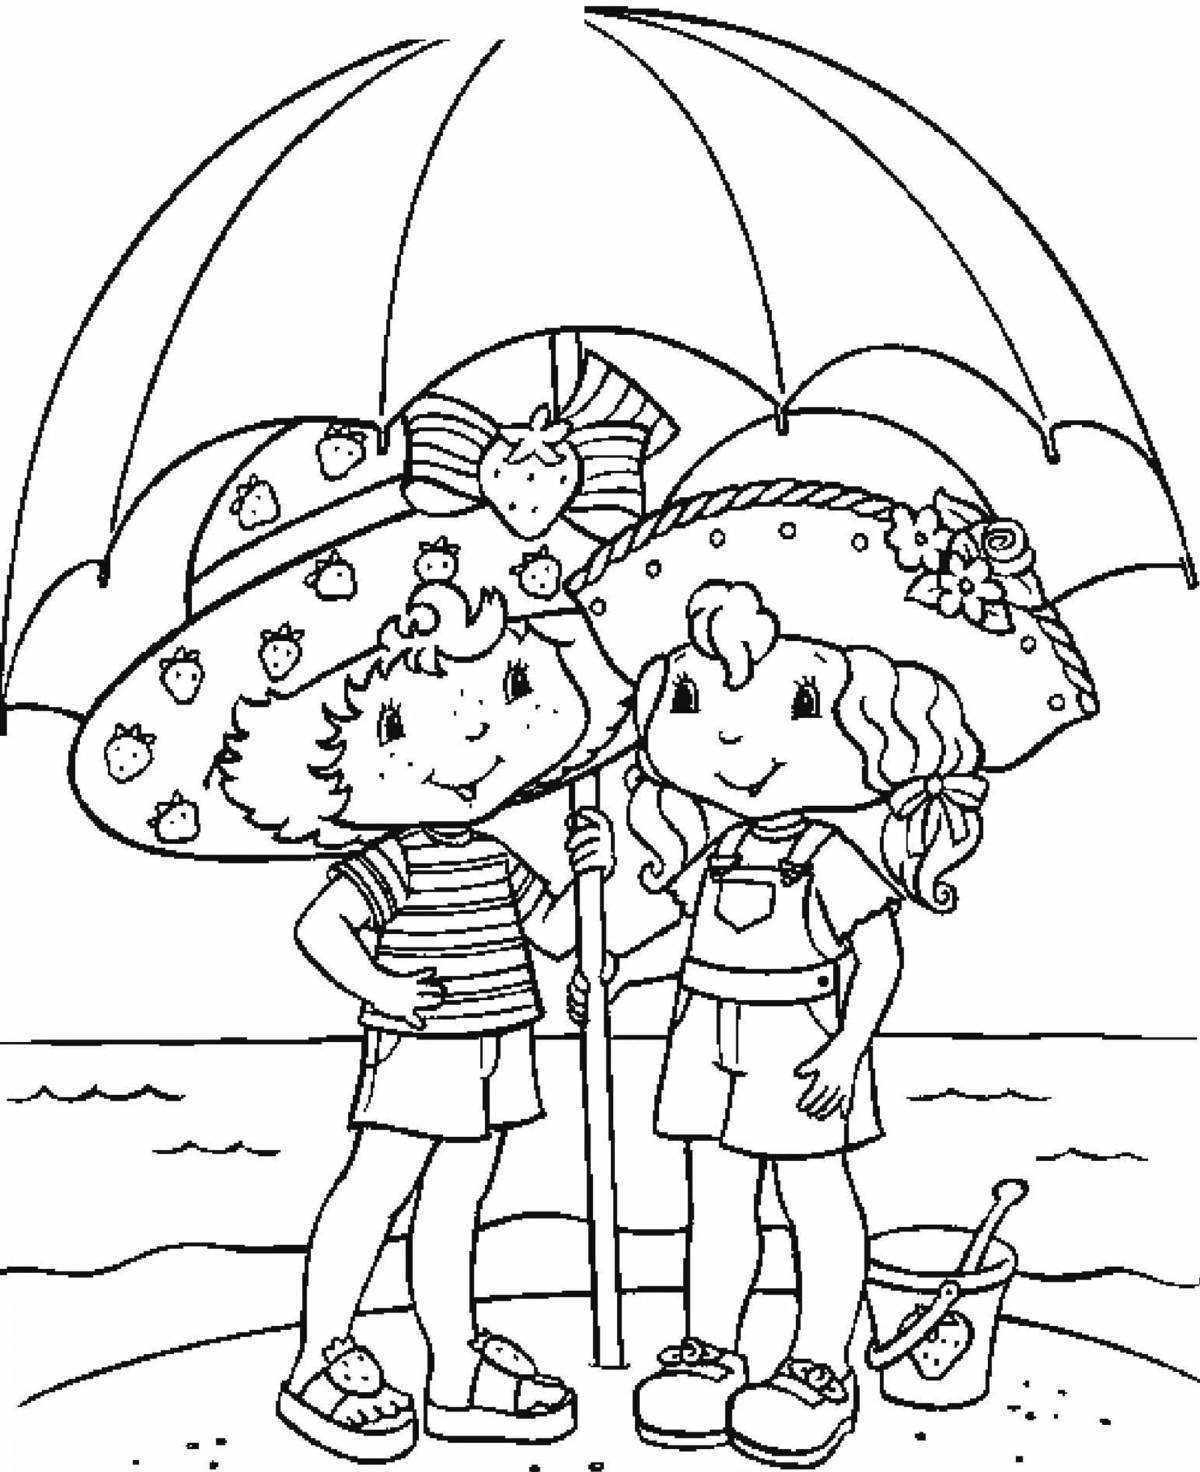 Radiant family at sea coloring page